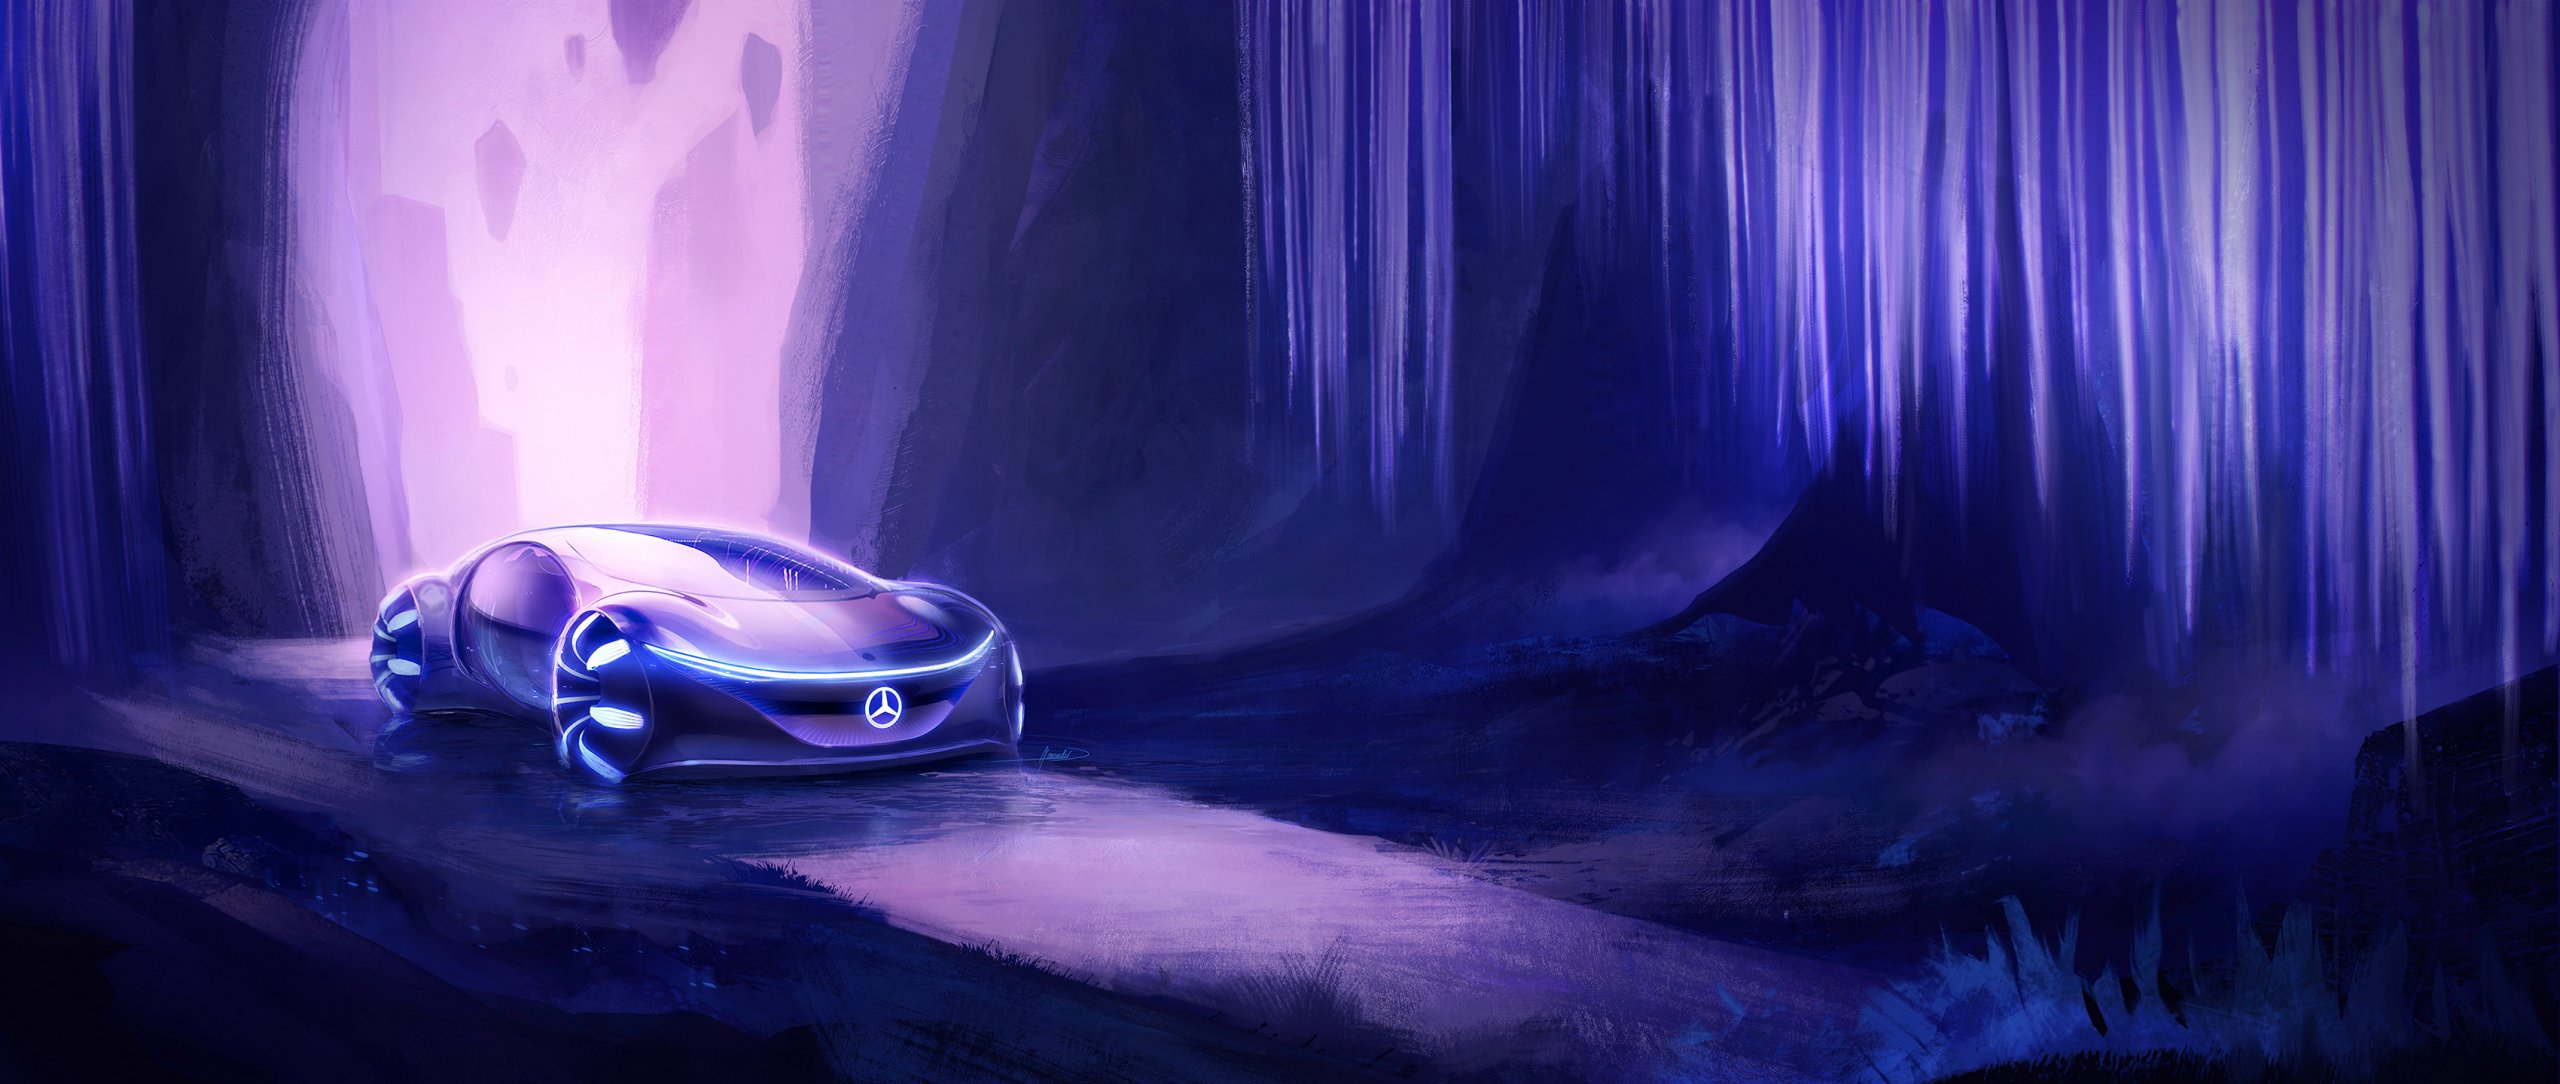 Drawing of the Mercedes-Benz VISION AVTR – inspired by AVATAR